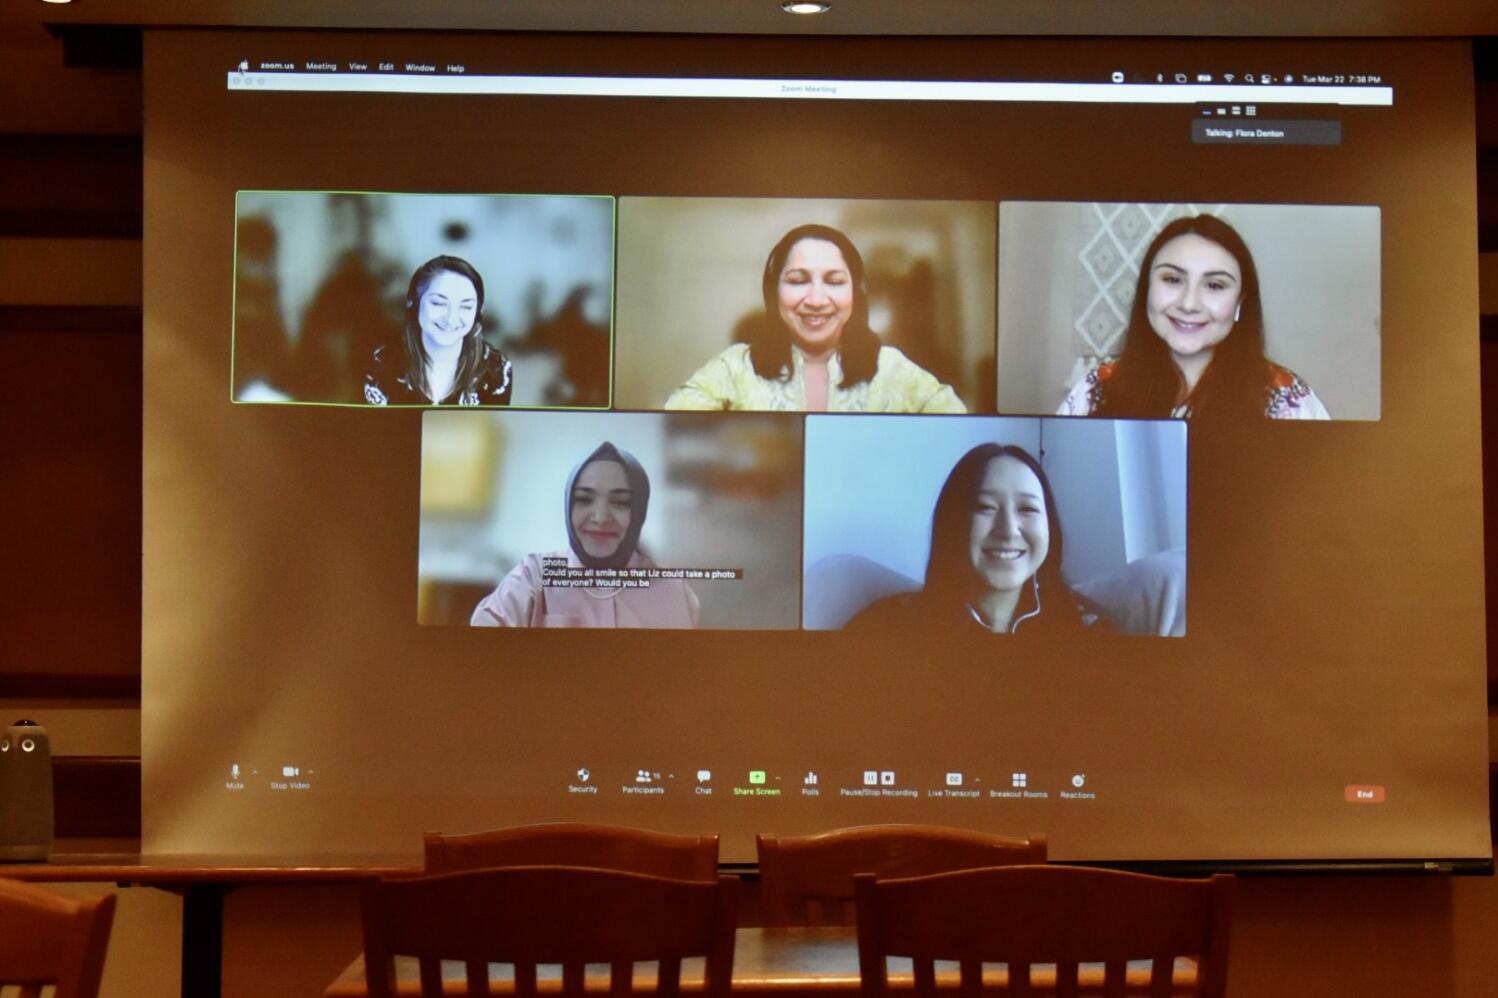 Registered dietitians and dietetic interns from different backgrounds shared about their cultures’ food traditions over Zoom. Pictured (clockwise from top left): Leia Flure, Manju Karkare, Kathleen Castrejon, Nancy Chang, and Enise Urcan.